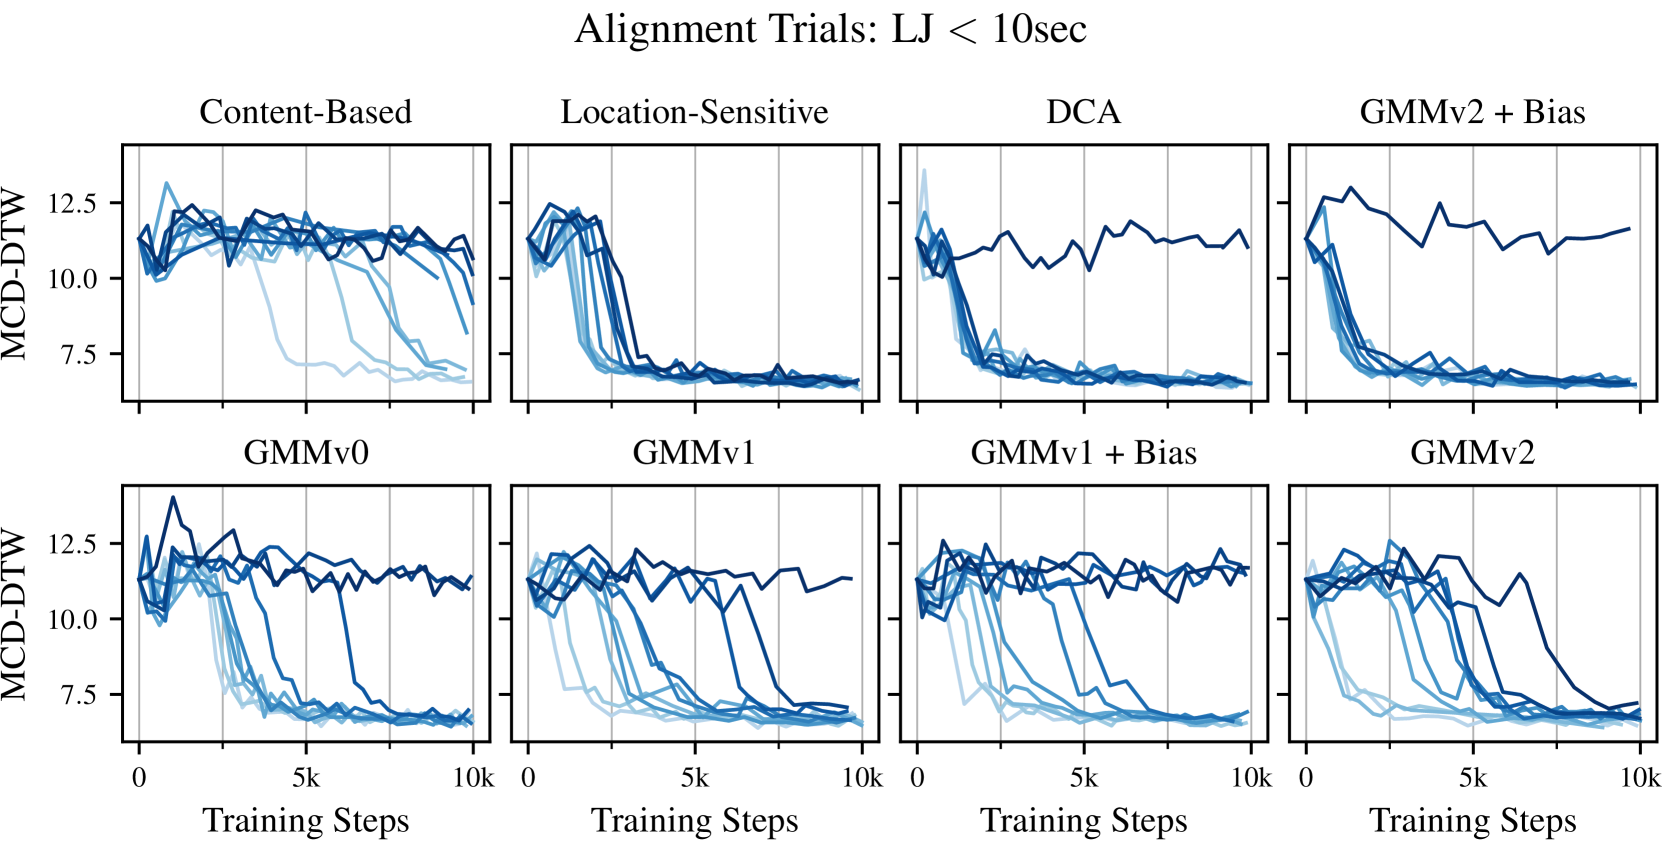 Figure 2: Alignment trials for 8 different mechanisms. (DCA, 2019)